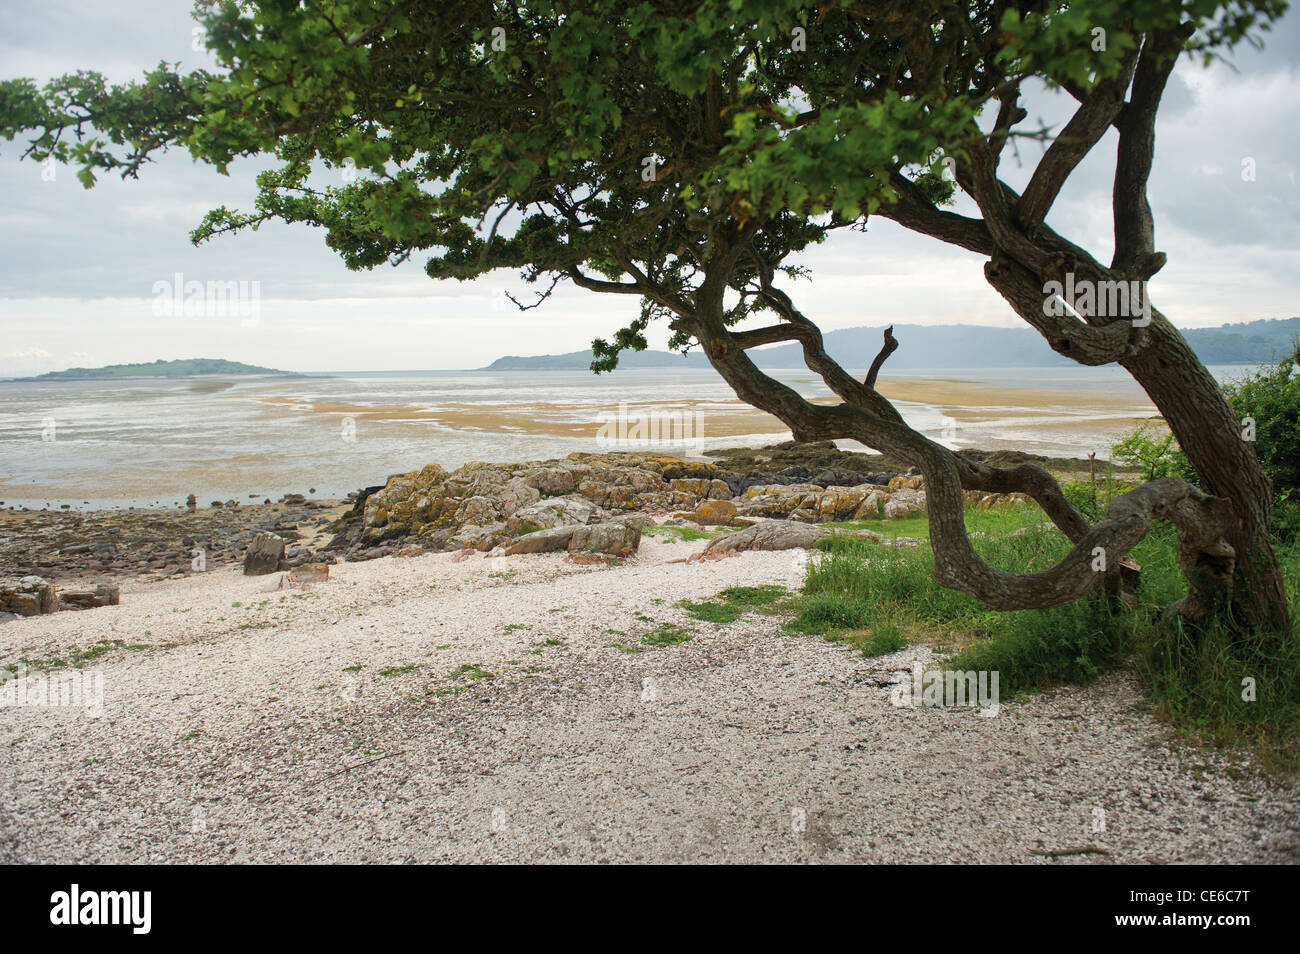 A view from the beach at Kippford Dumfries & Galloway Scotland UK Stock Photo